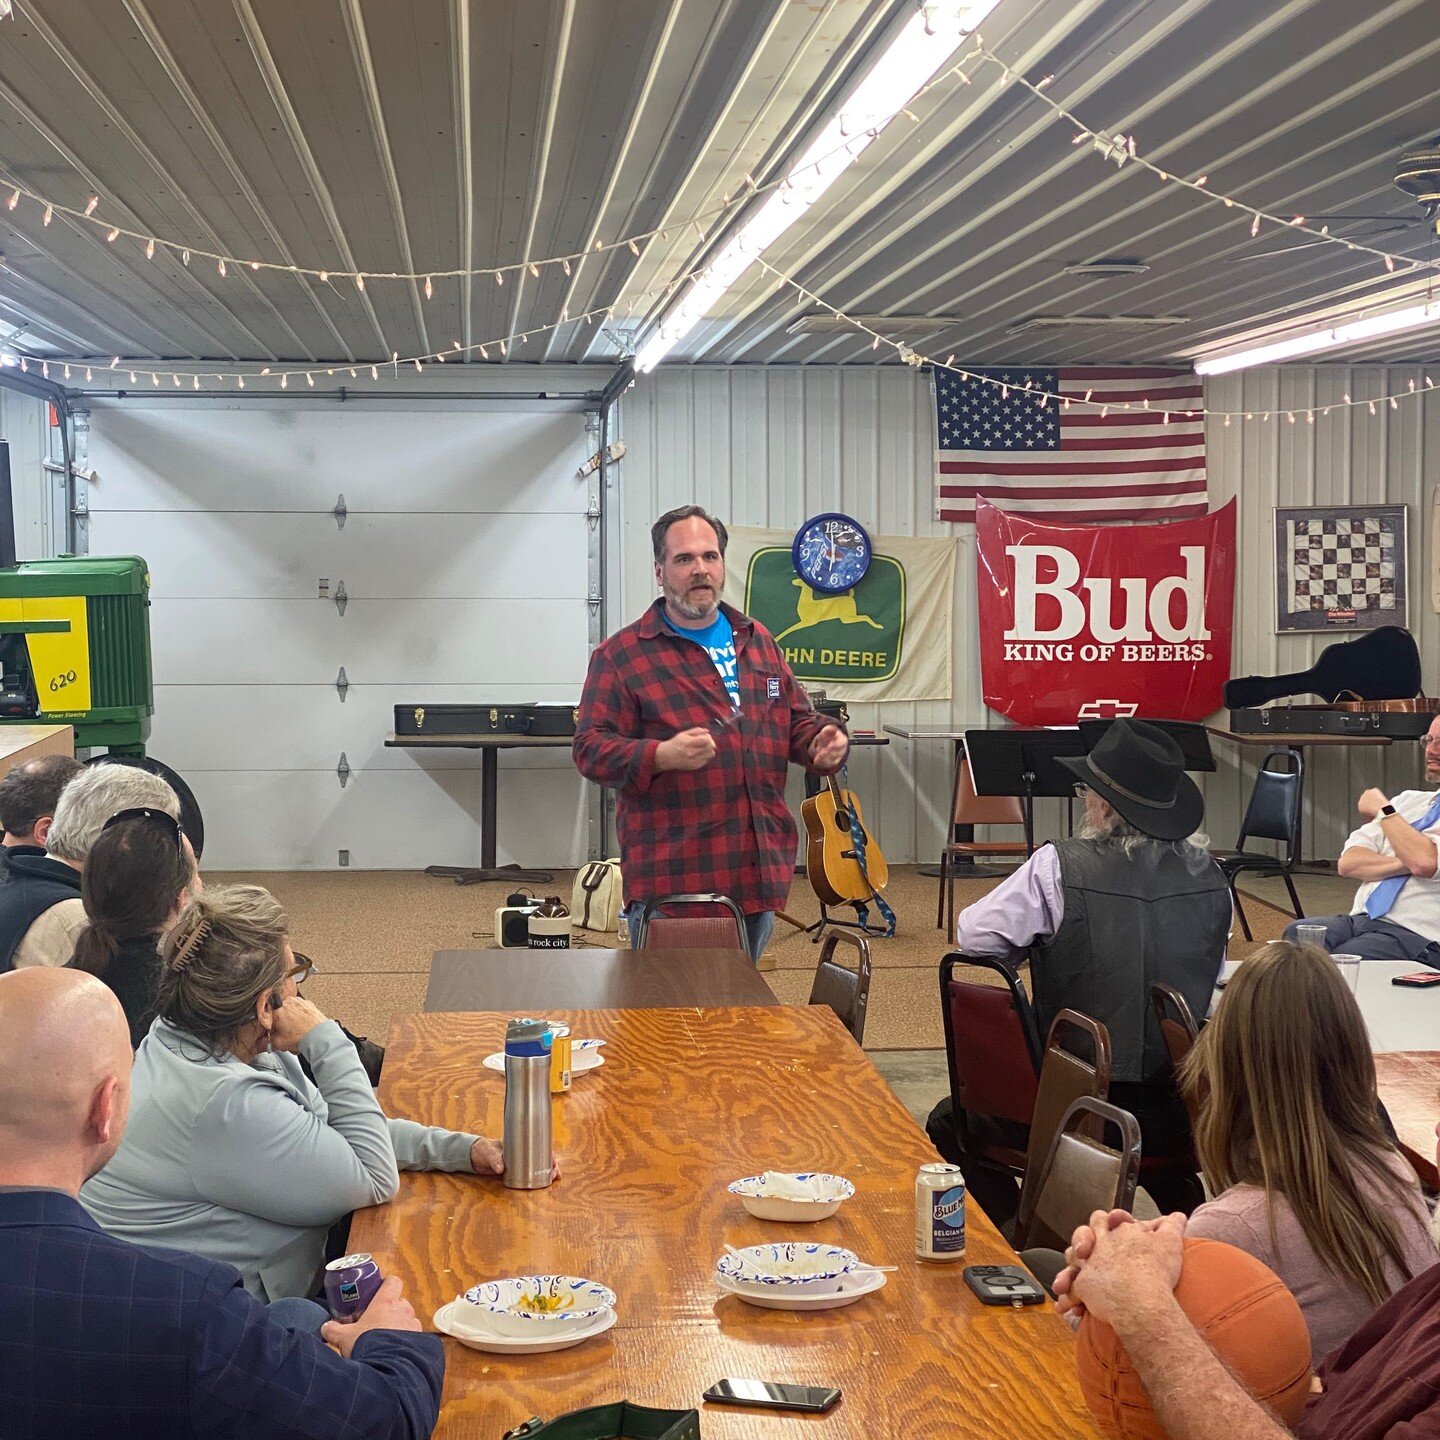 Made a Memory: A Huge thank you to Dan and Pat Combs, Kruzer, Bill Breeden and the Ramptuckians, and former Commissioner Bill Moser and Clarice for hosting my campaign out in the county.
Bill&rsquo;s place is exactly one of the places our party needs